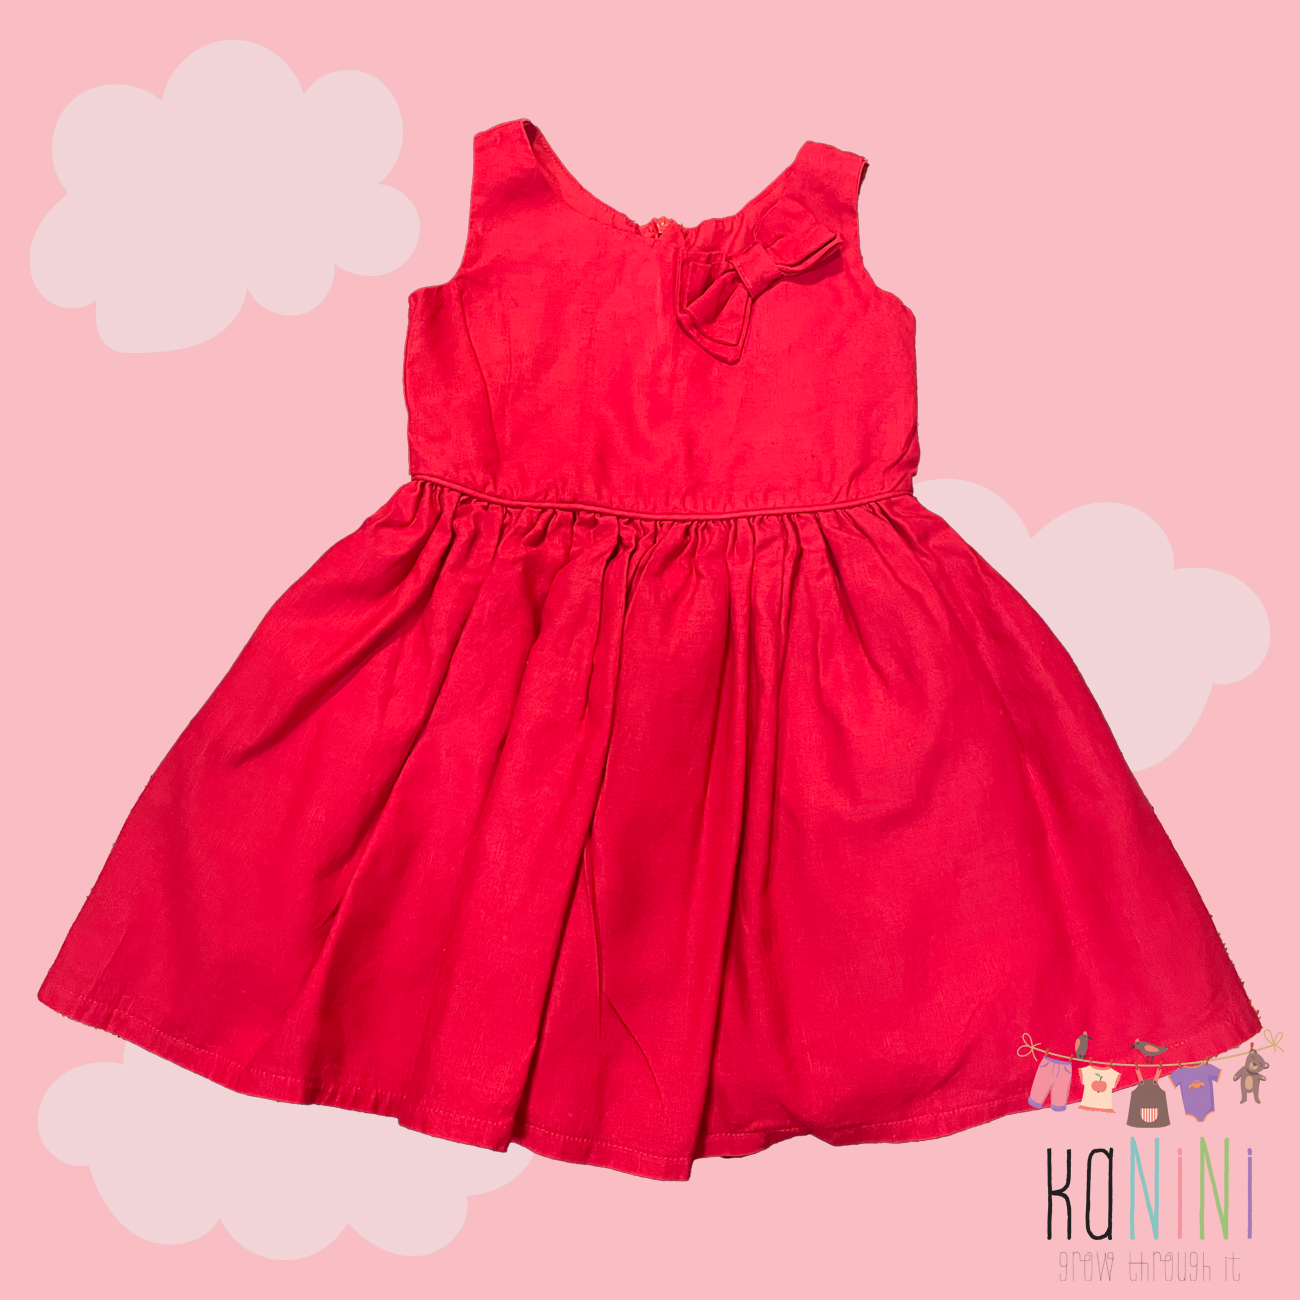 Featured image for “Woolworths 4 Years Girls Red Party Dress”